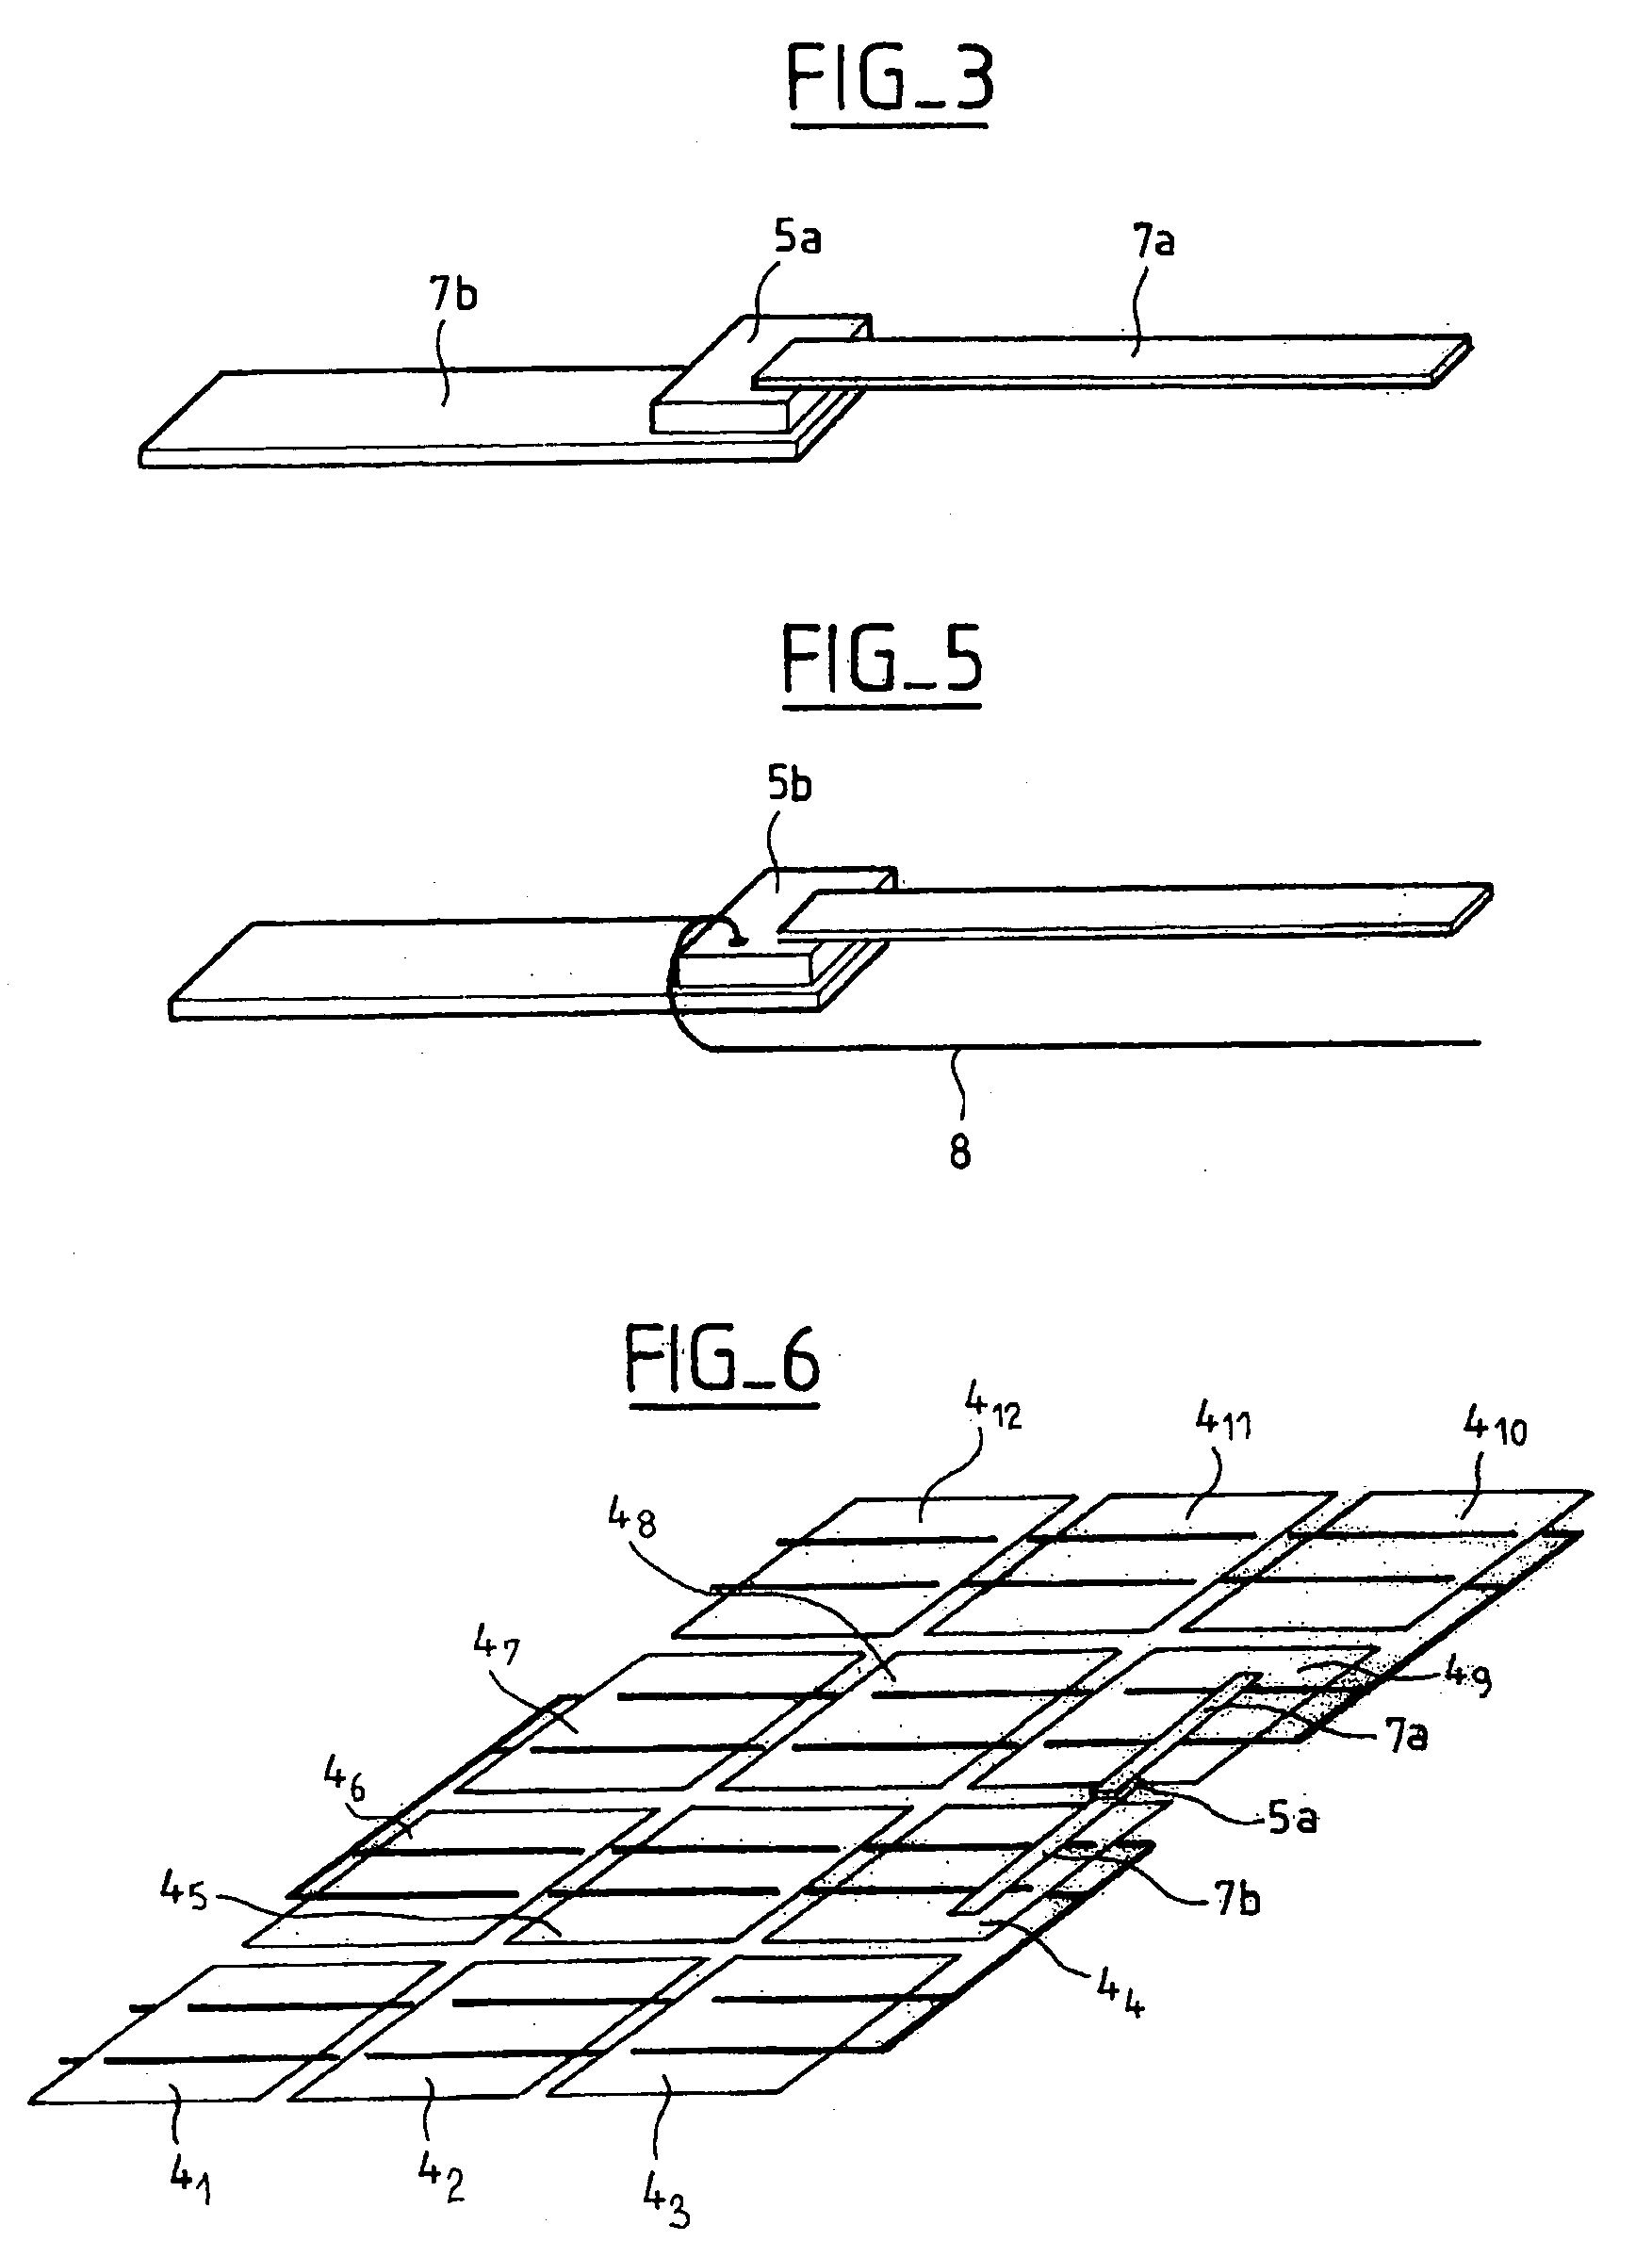 Photovoltaic module with an electronic device in the laminated stack